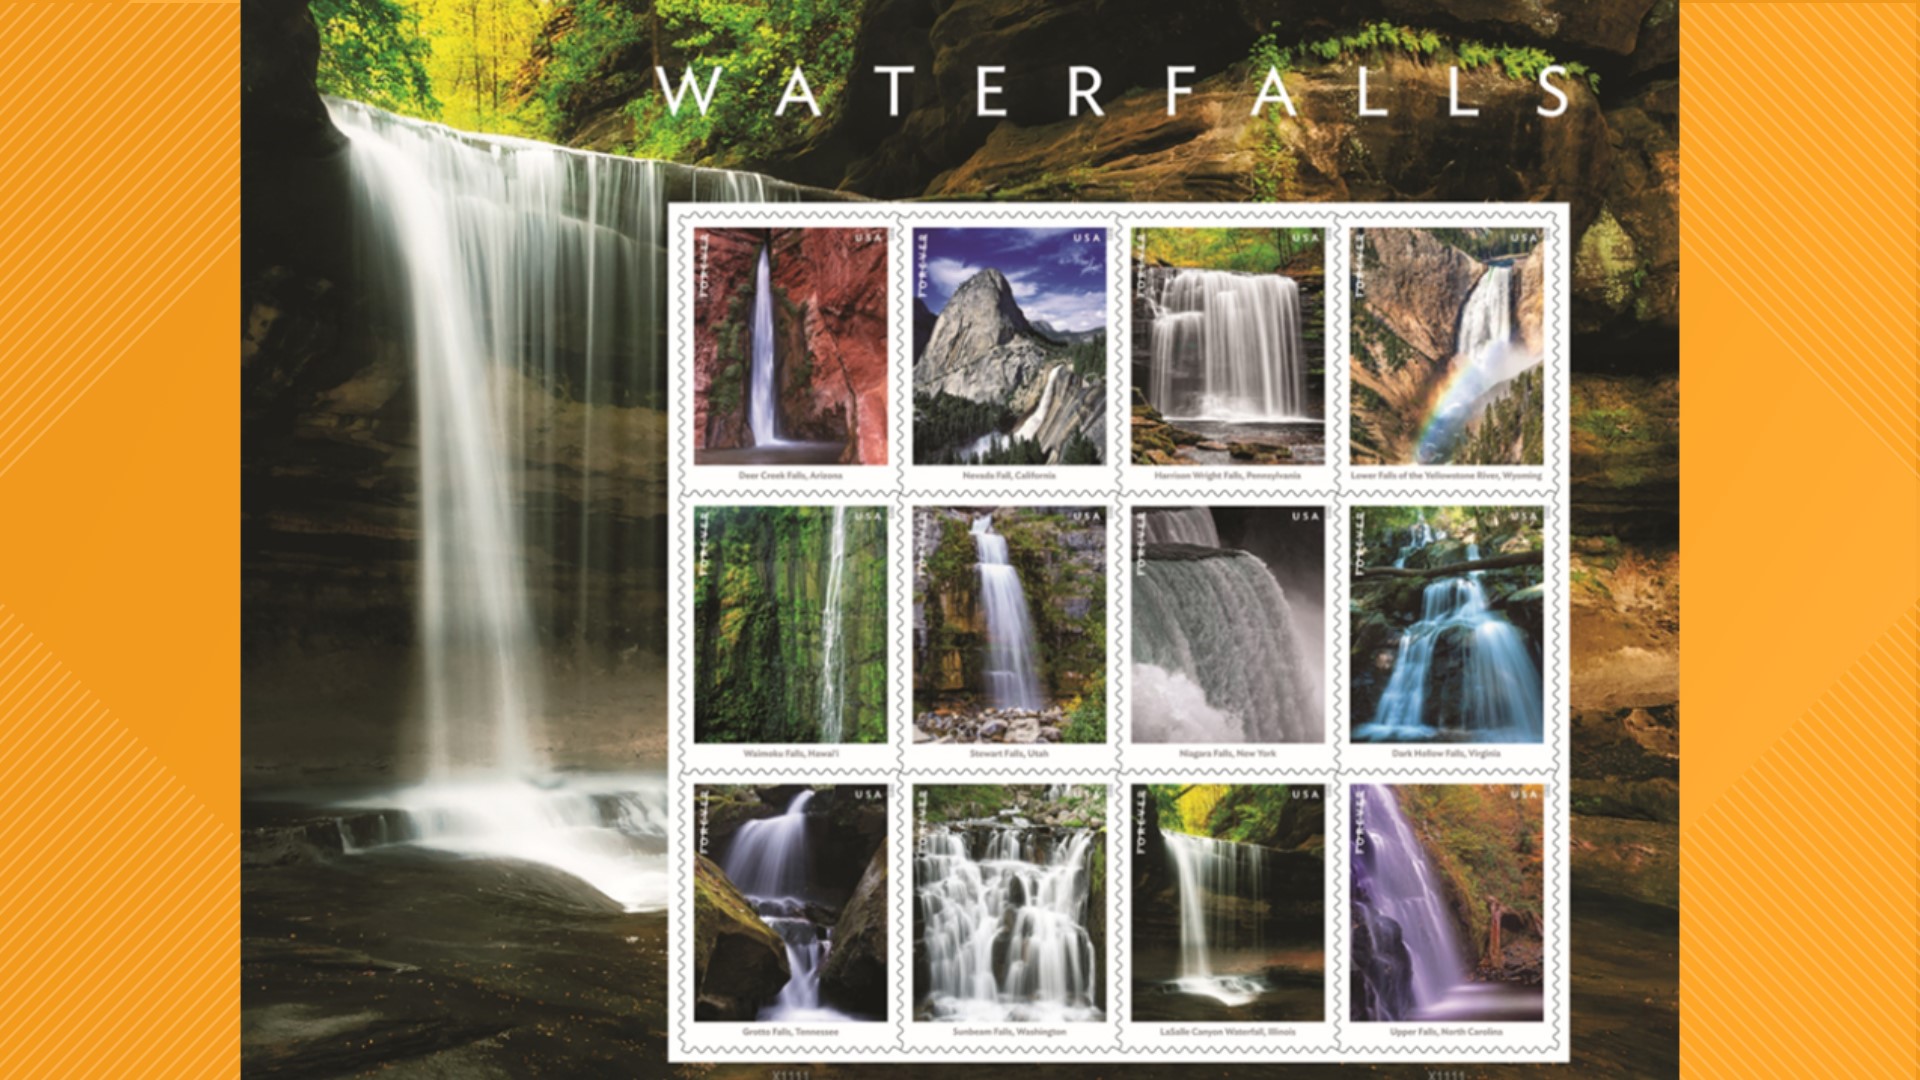 One of the falls in the state park will be featured in a series of stamps from the USPS celebrating the nation's natural beauty.